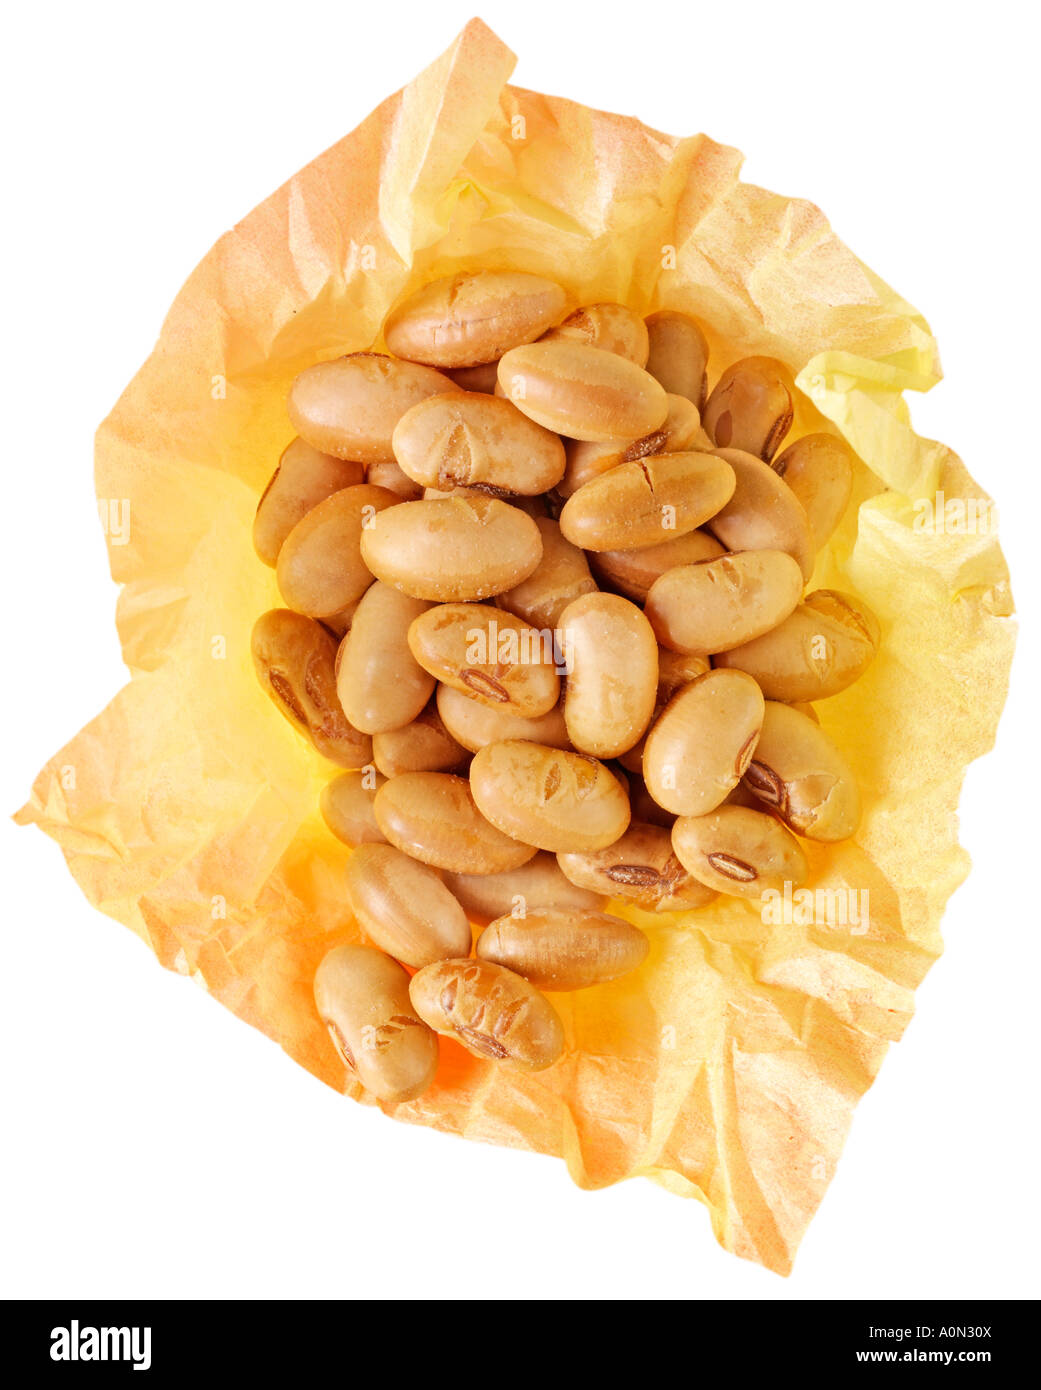 SOYA NUTS CUT OUT Stock Photo